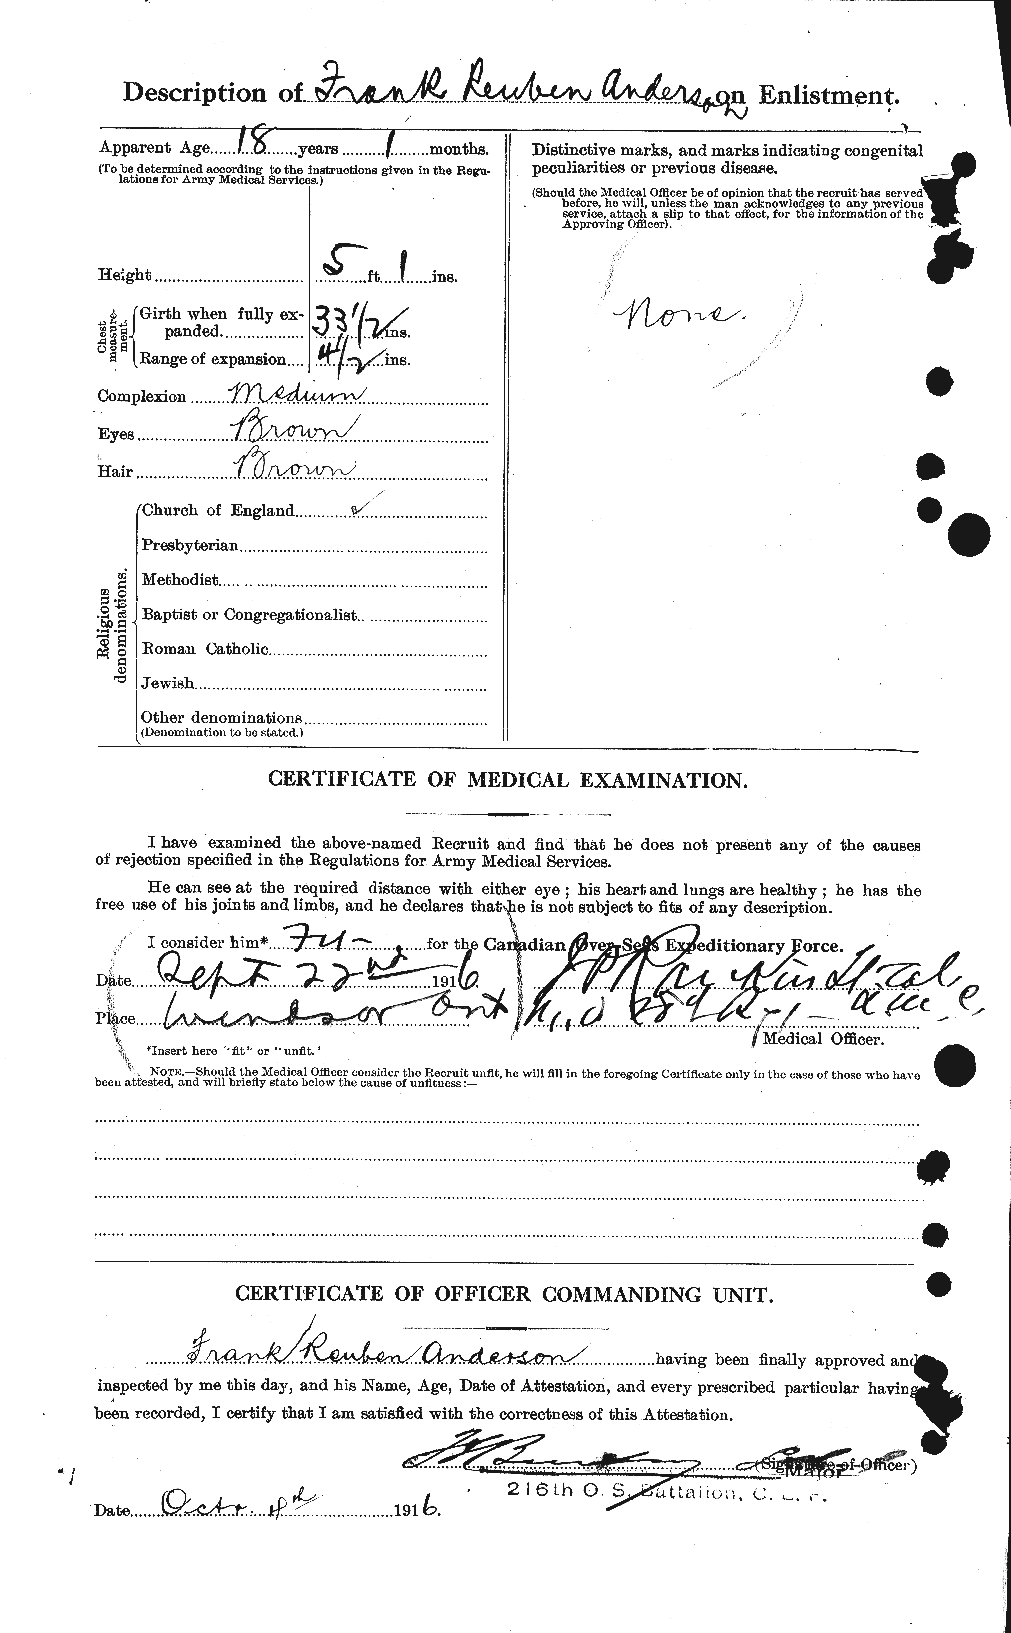 Personnel Records of the First World War - CEF 209843b